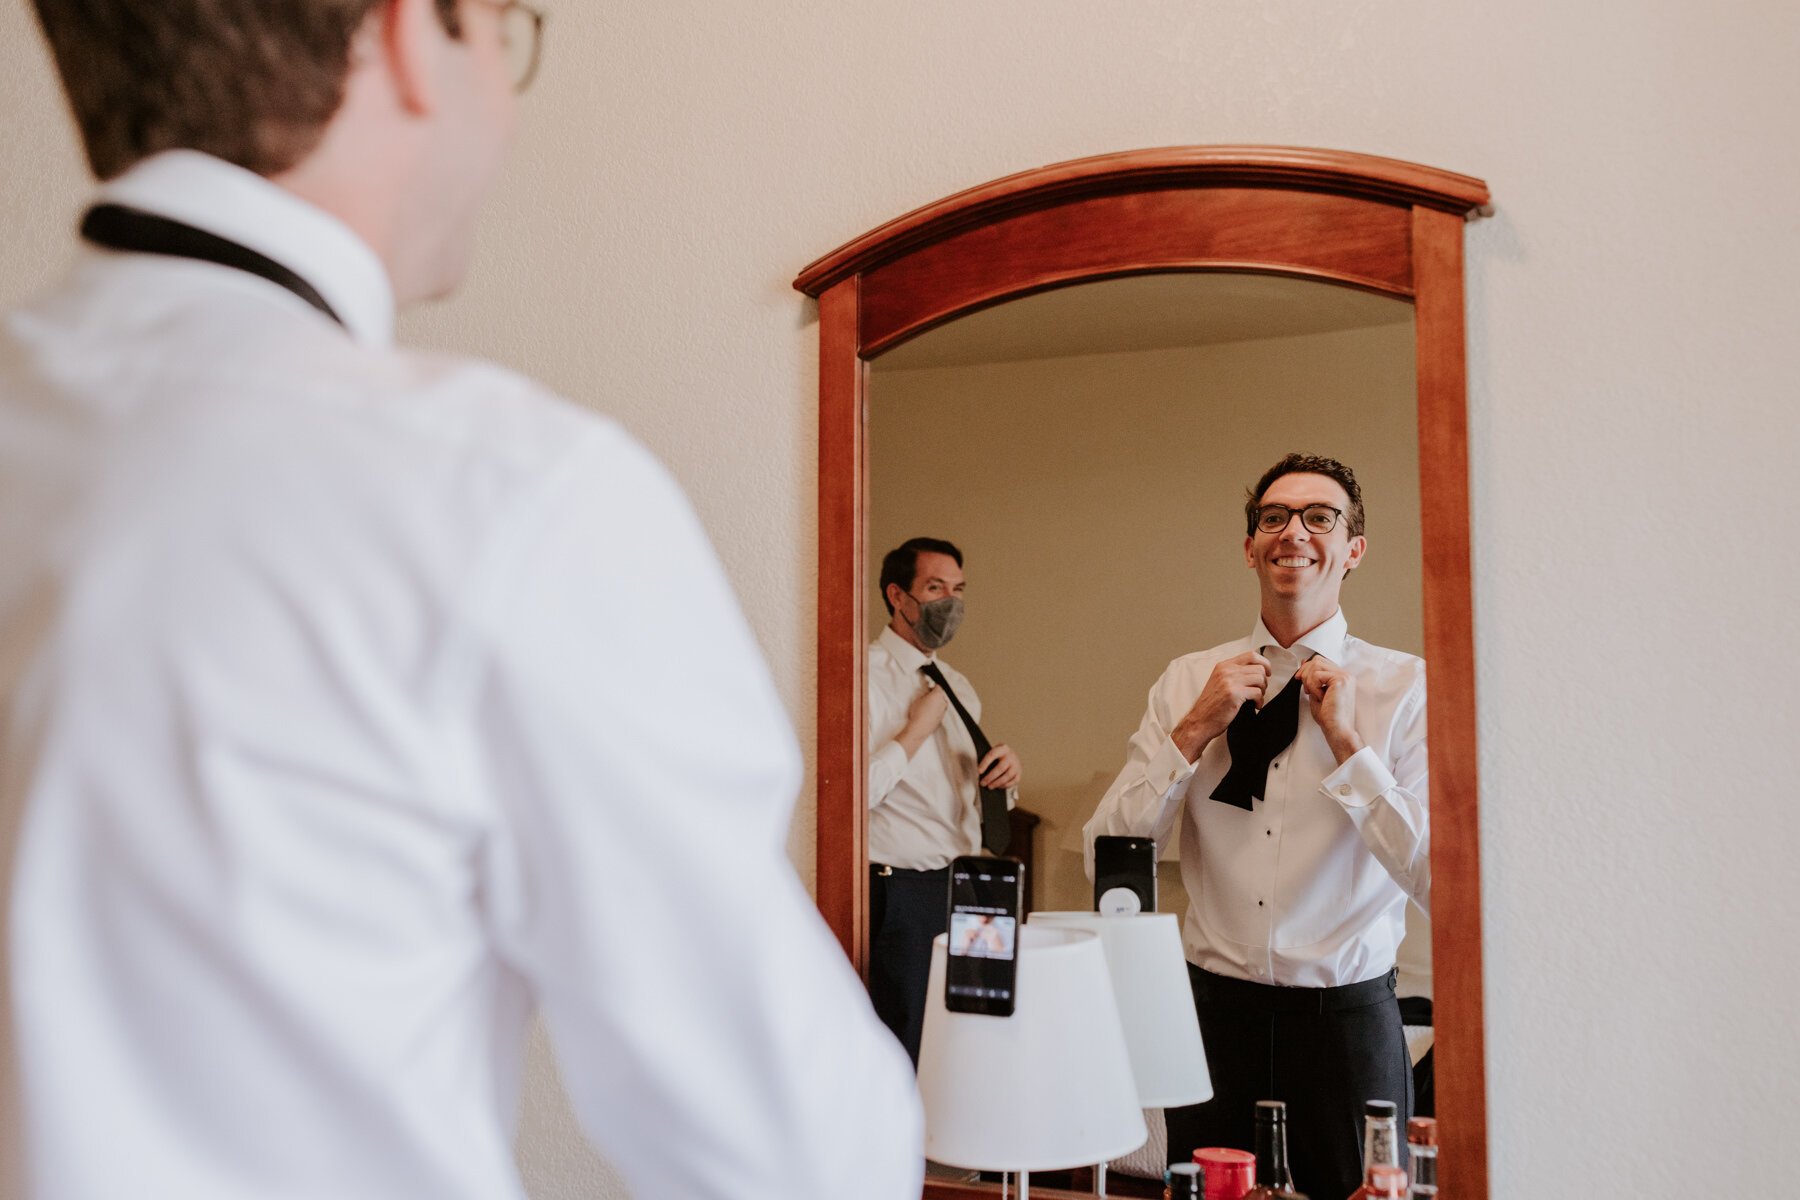  Groom getting ready in mirror tying bow tie, Palm Springs Wedding Photographer | Palm Mountain Resort and Spa | Tida Svy Photography 